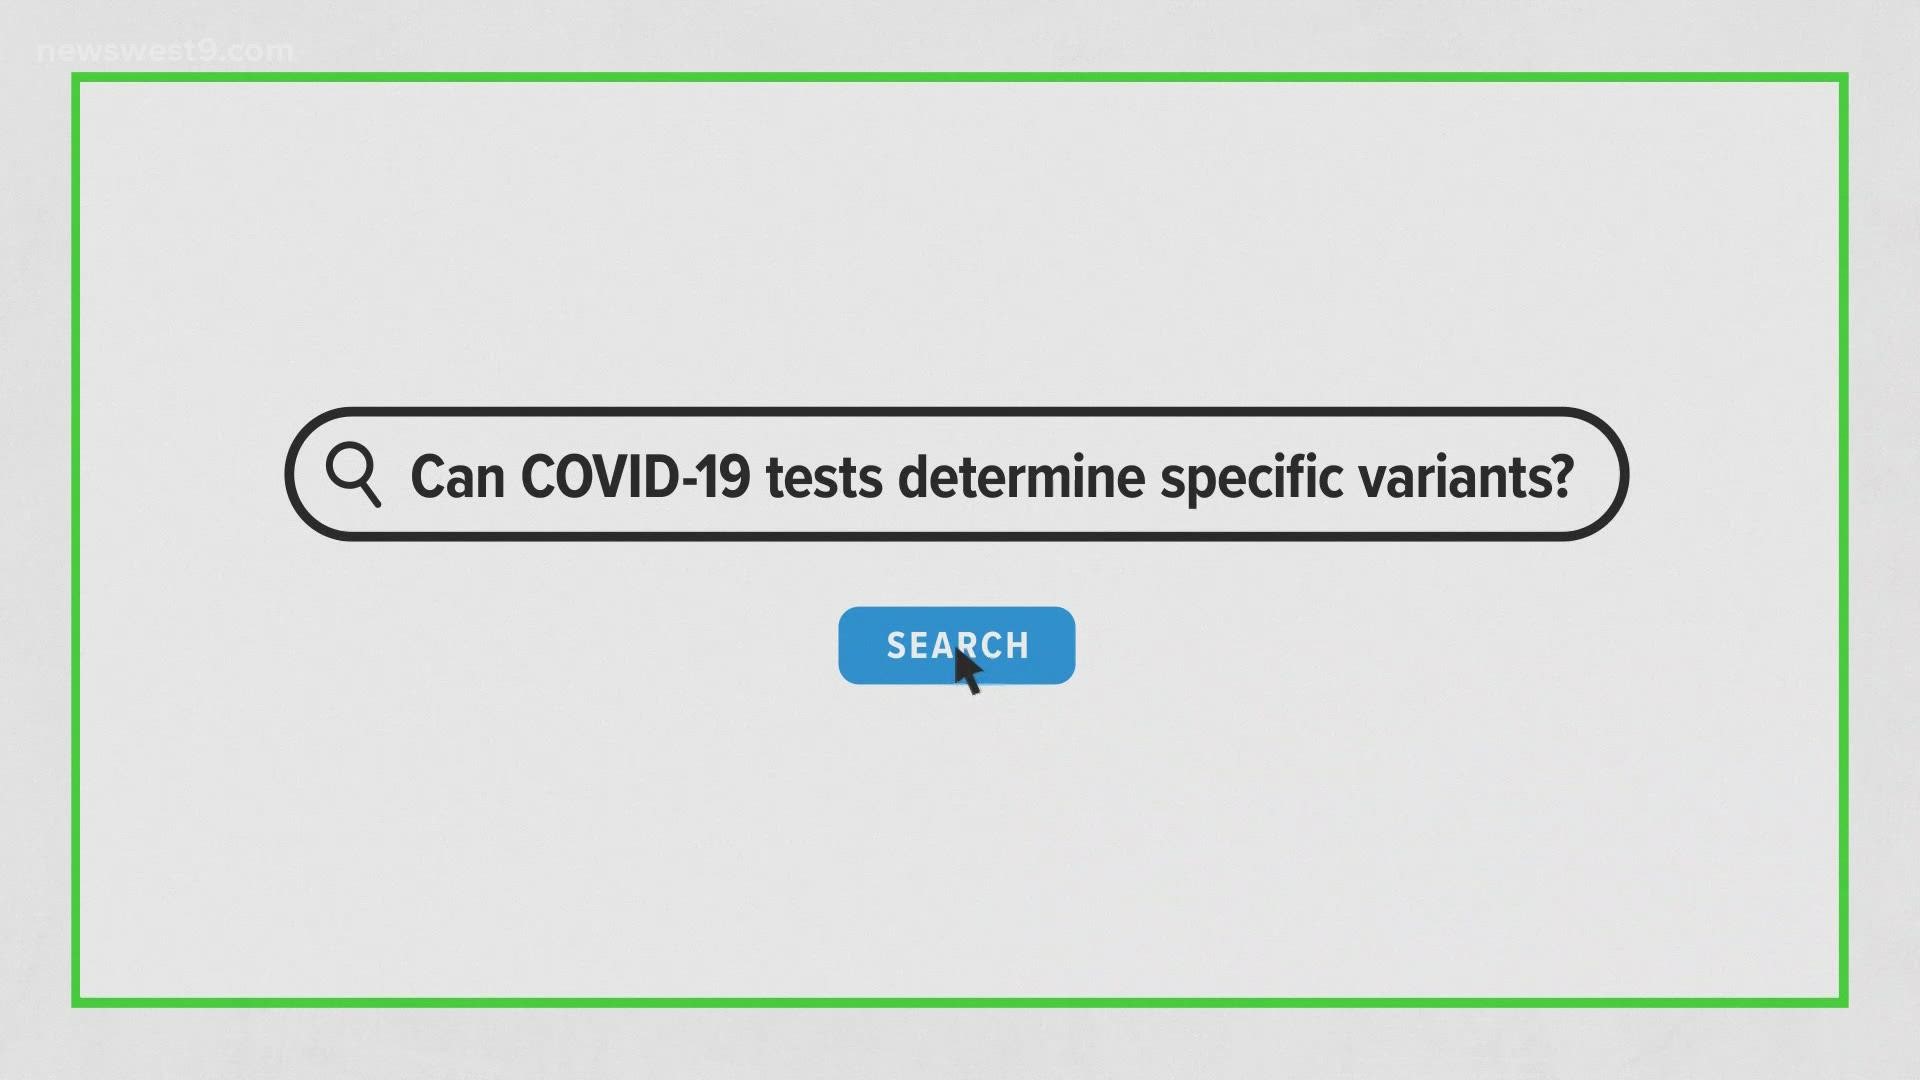 However, this specific test is not included as part of the general testing process to detect COVID.